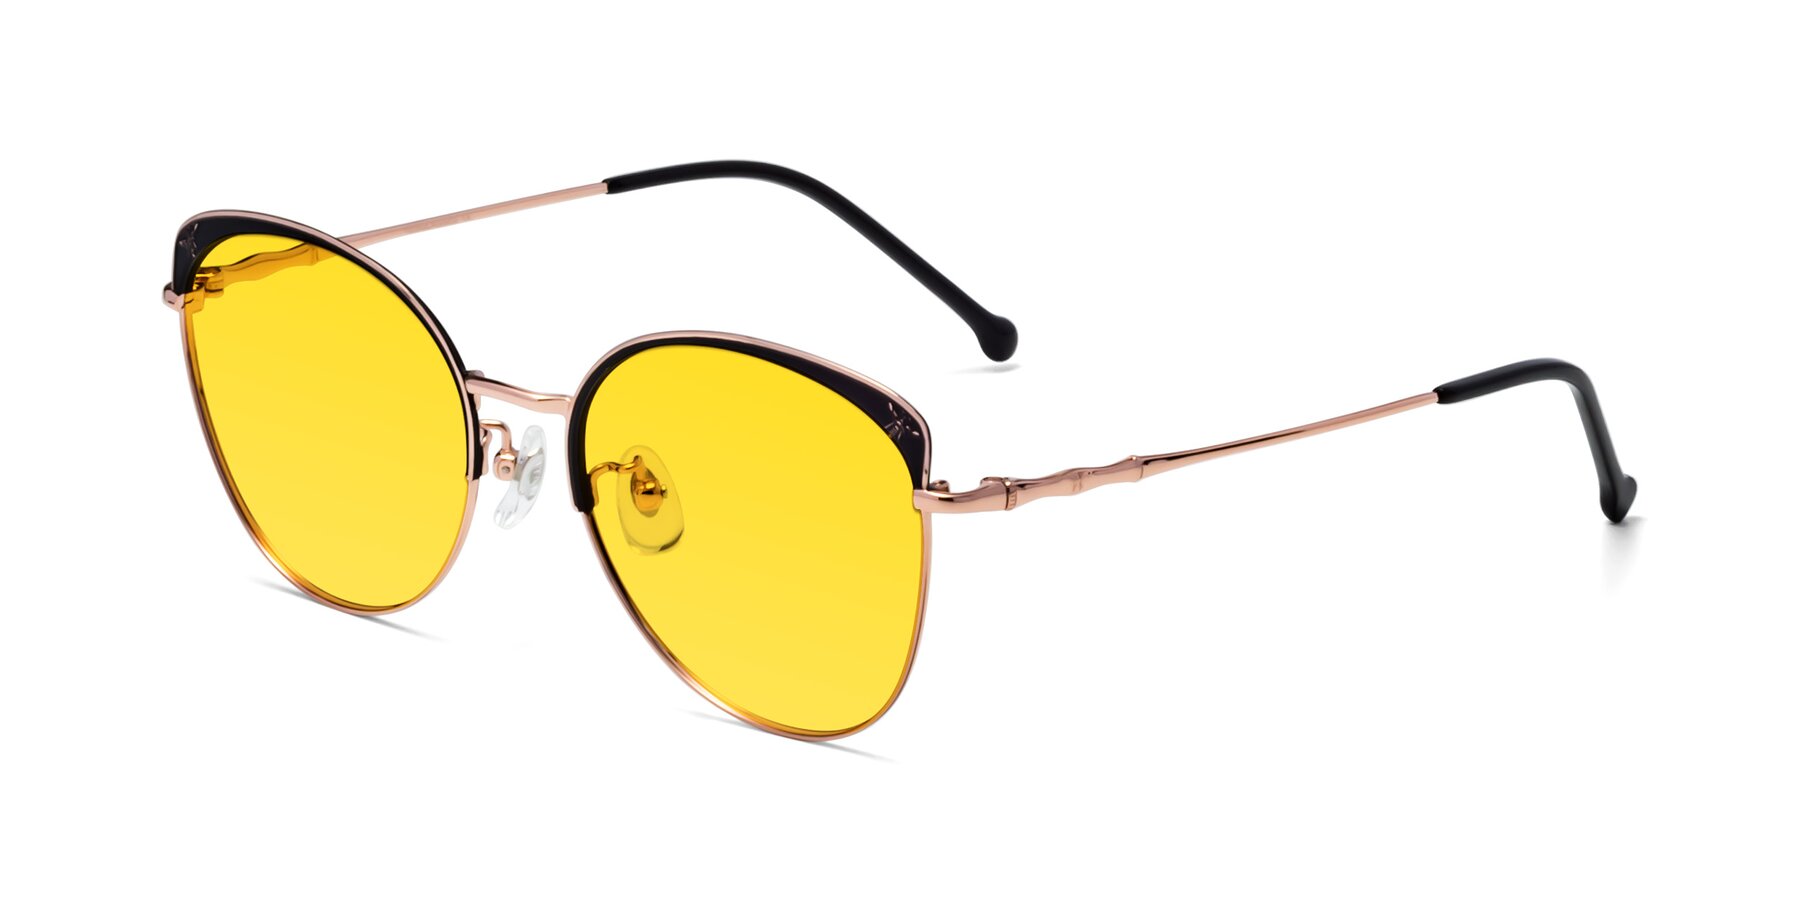 Angle of 18019 in Black-Rose Gold with Yellow Tinted Lenses